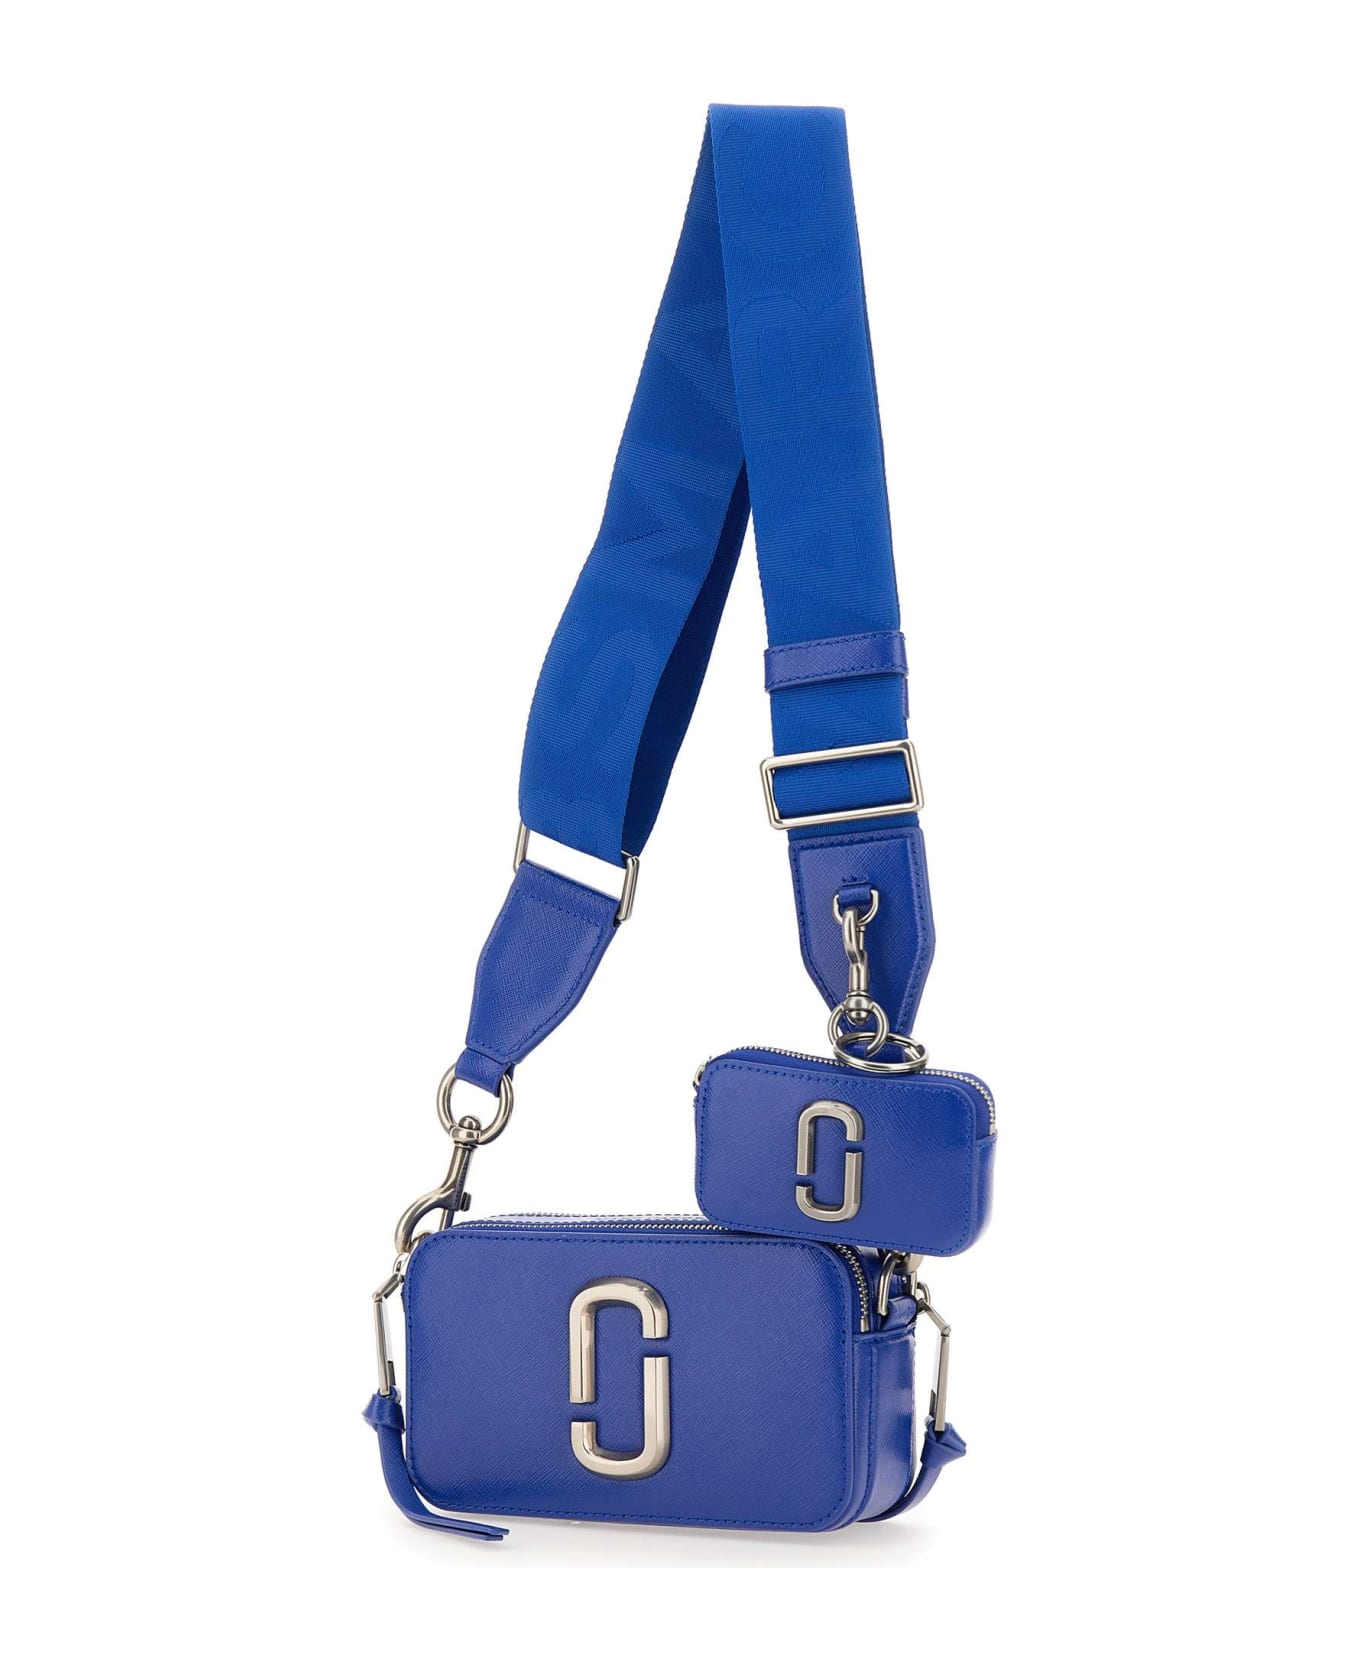 Marc Jacobs "the Utility Snapshot" Leather Bag - BLUE